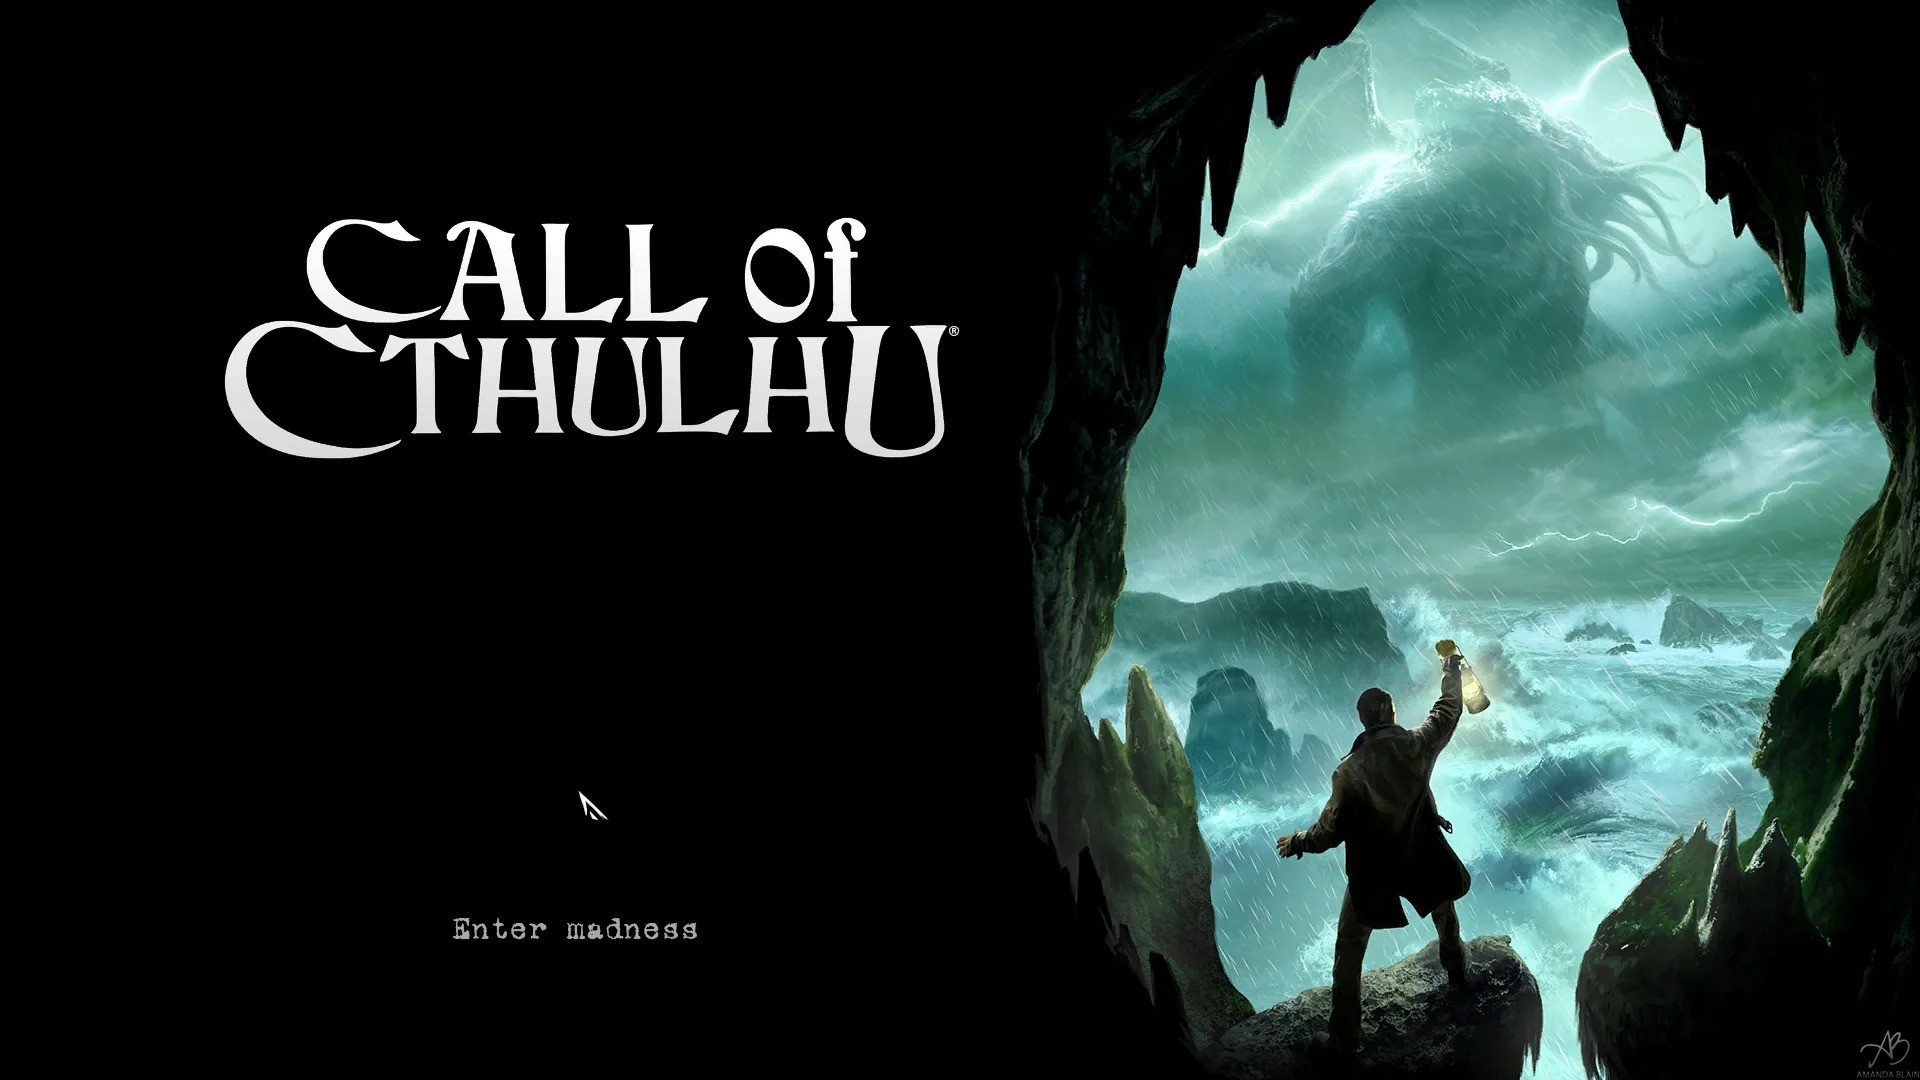 Call Of Cthulhu is spooky without jumpscares!